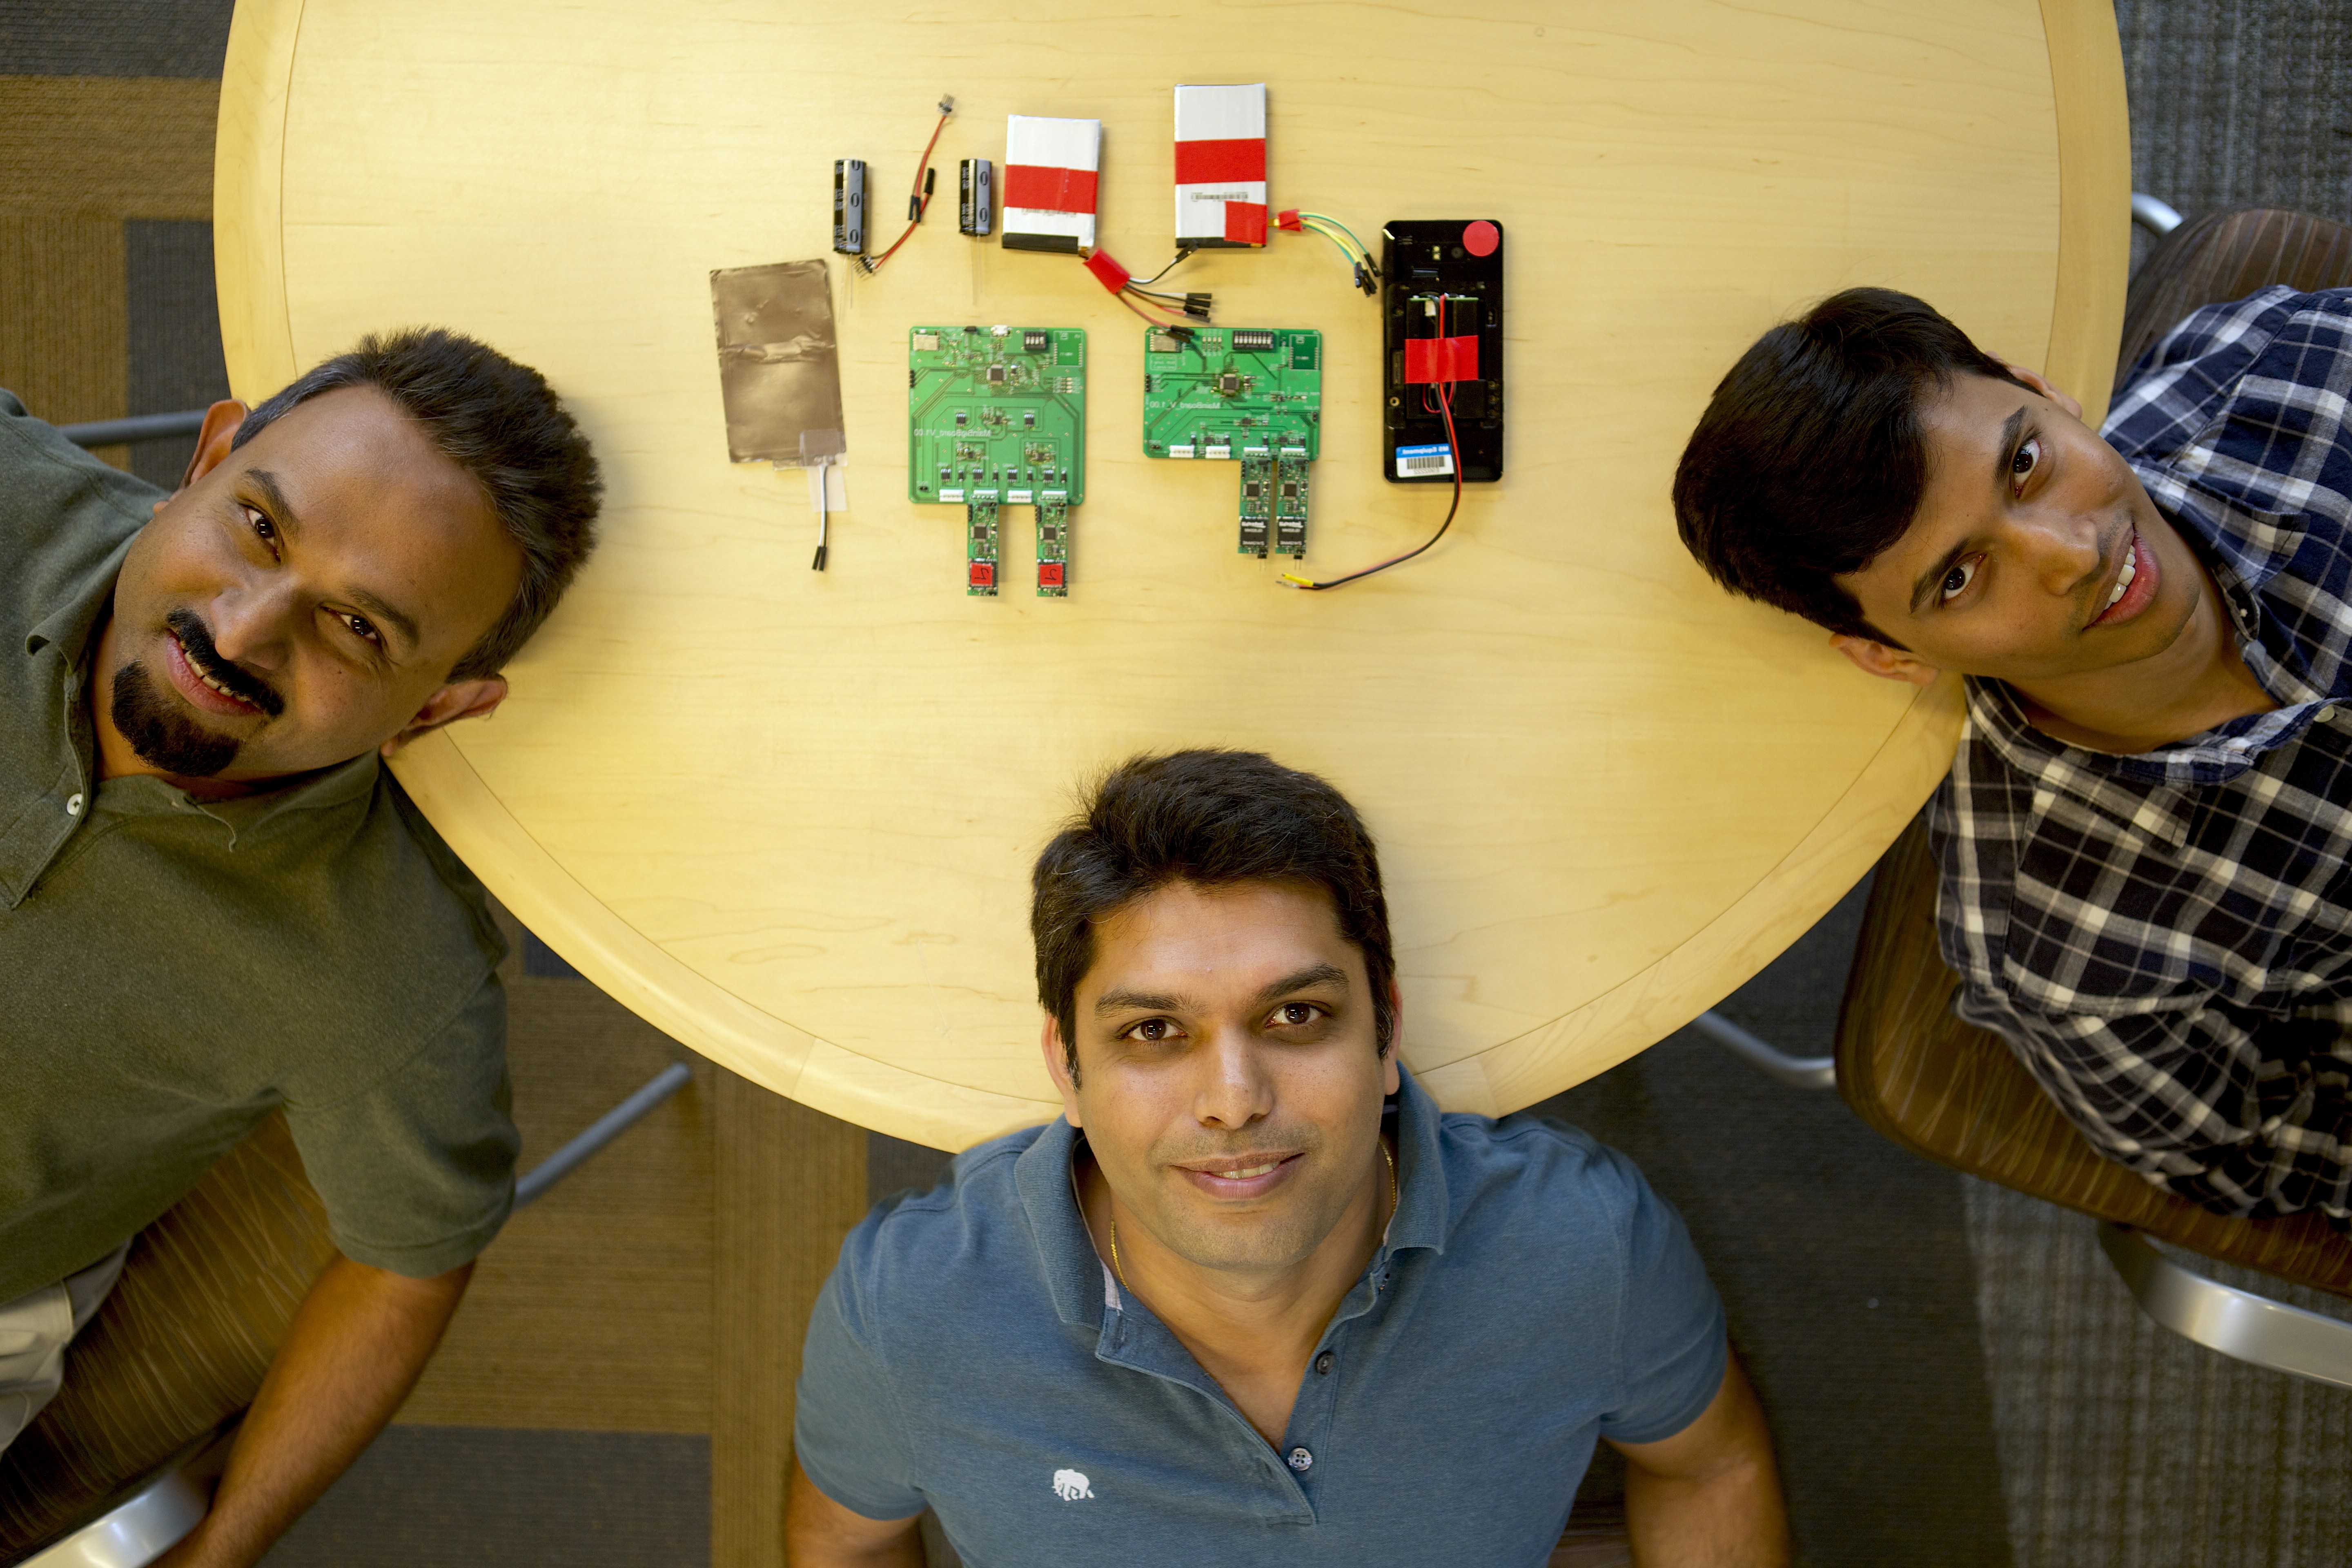 Microsoft researchers Bodhi Priyantha, Ranveer Chandra and Anirudh Badam are among the researchers who worked on the new approach to extending gadget battery life. Photo credit: Jeremy Mashburn/Microsoft.